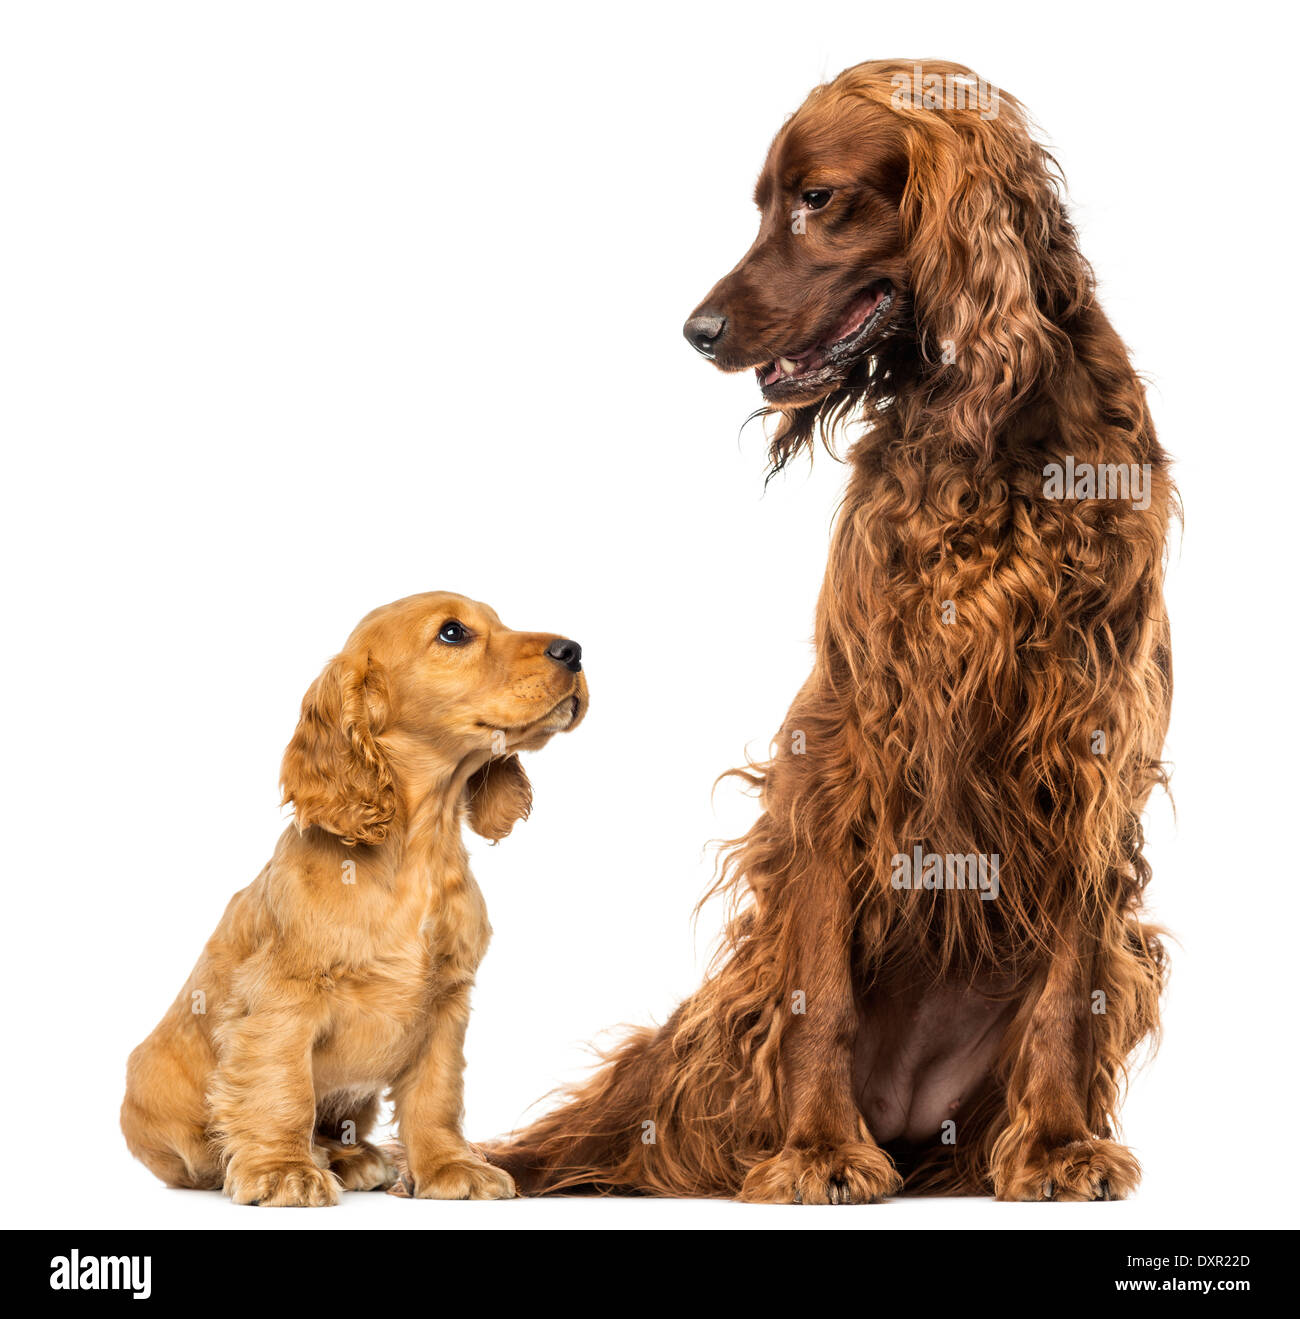 English Cocker spaniel puppy looking up at an Irish setter against white background Stock Photo